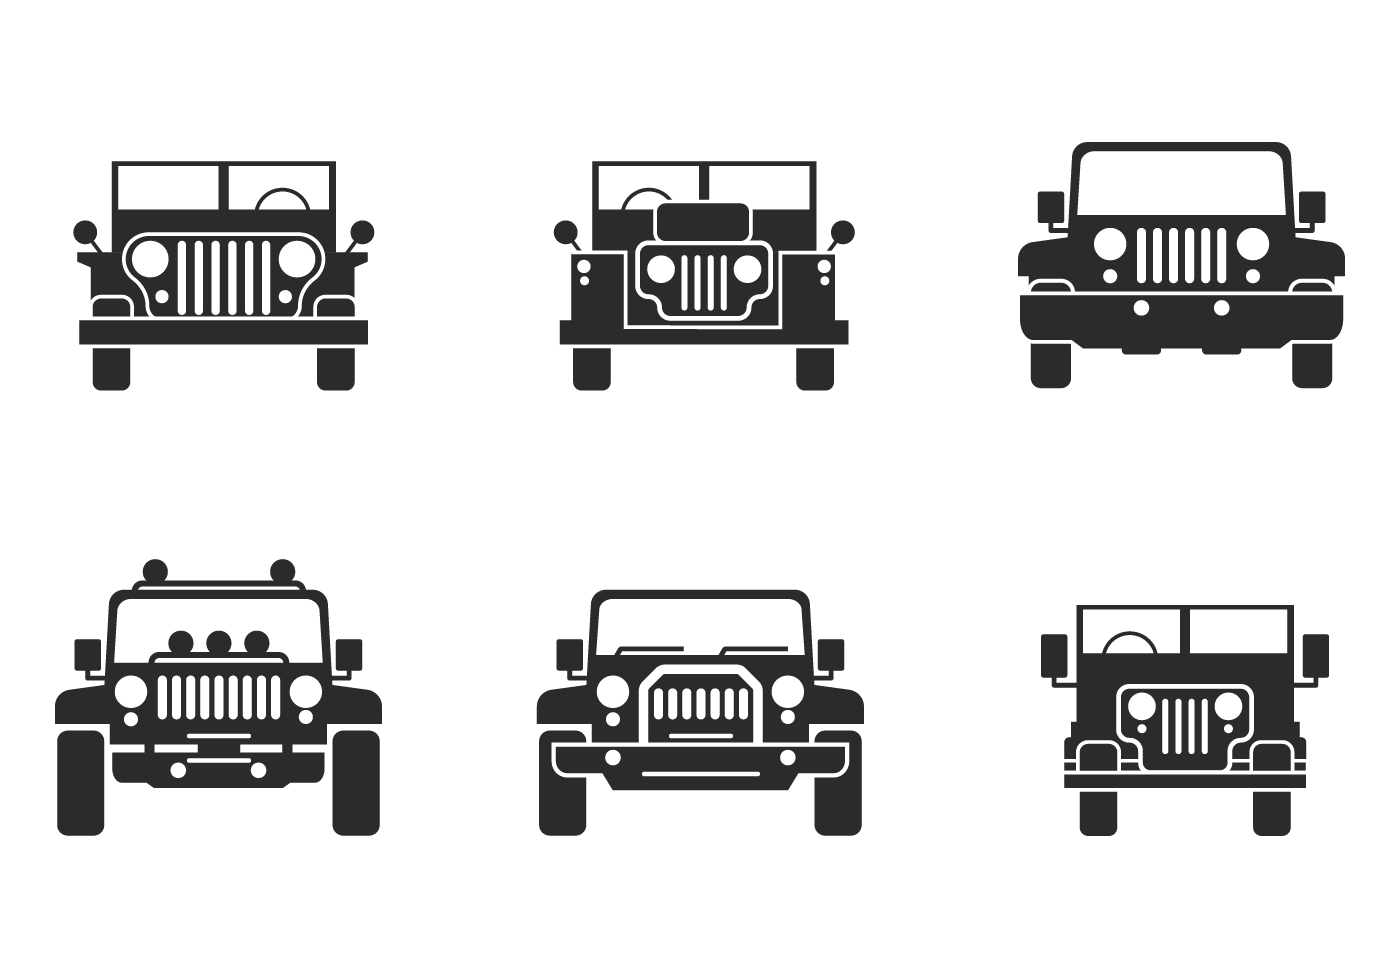 Browse 55 incredible Jeep Wrangler vectors, icons, clipart graphics, and ba...